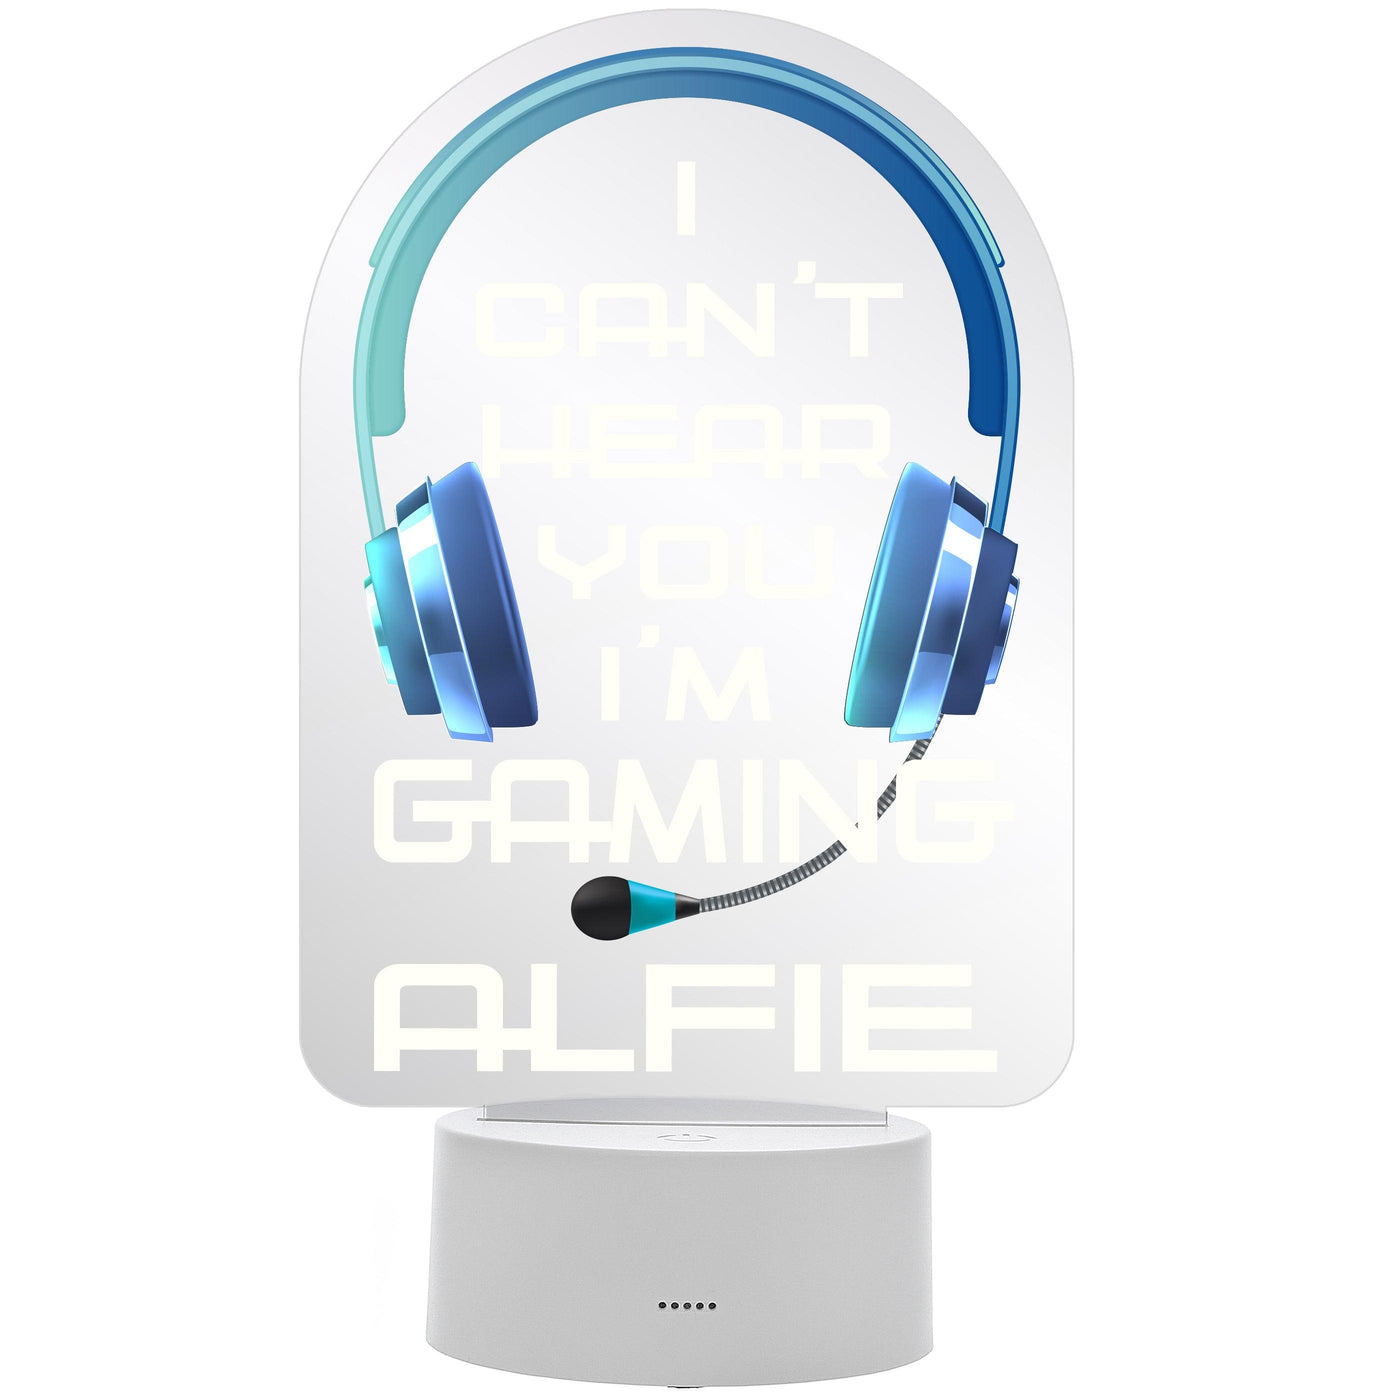 Personalised Blue Gaming LED Colour Changing Night Light - Shop Personalised Gifts